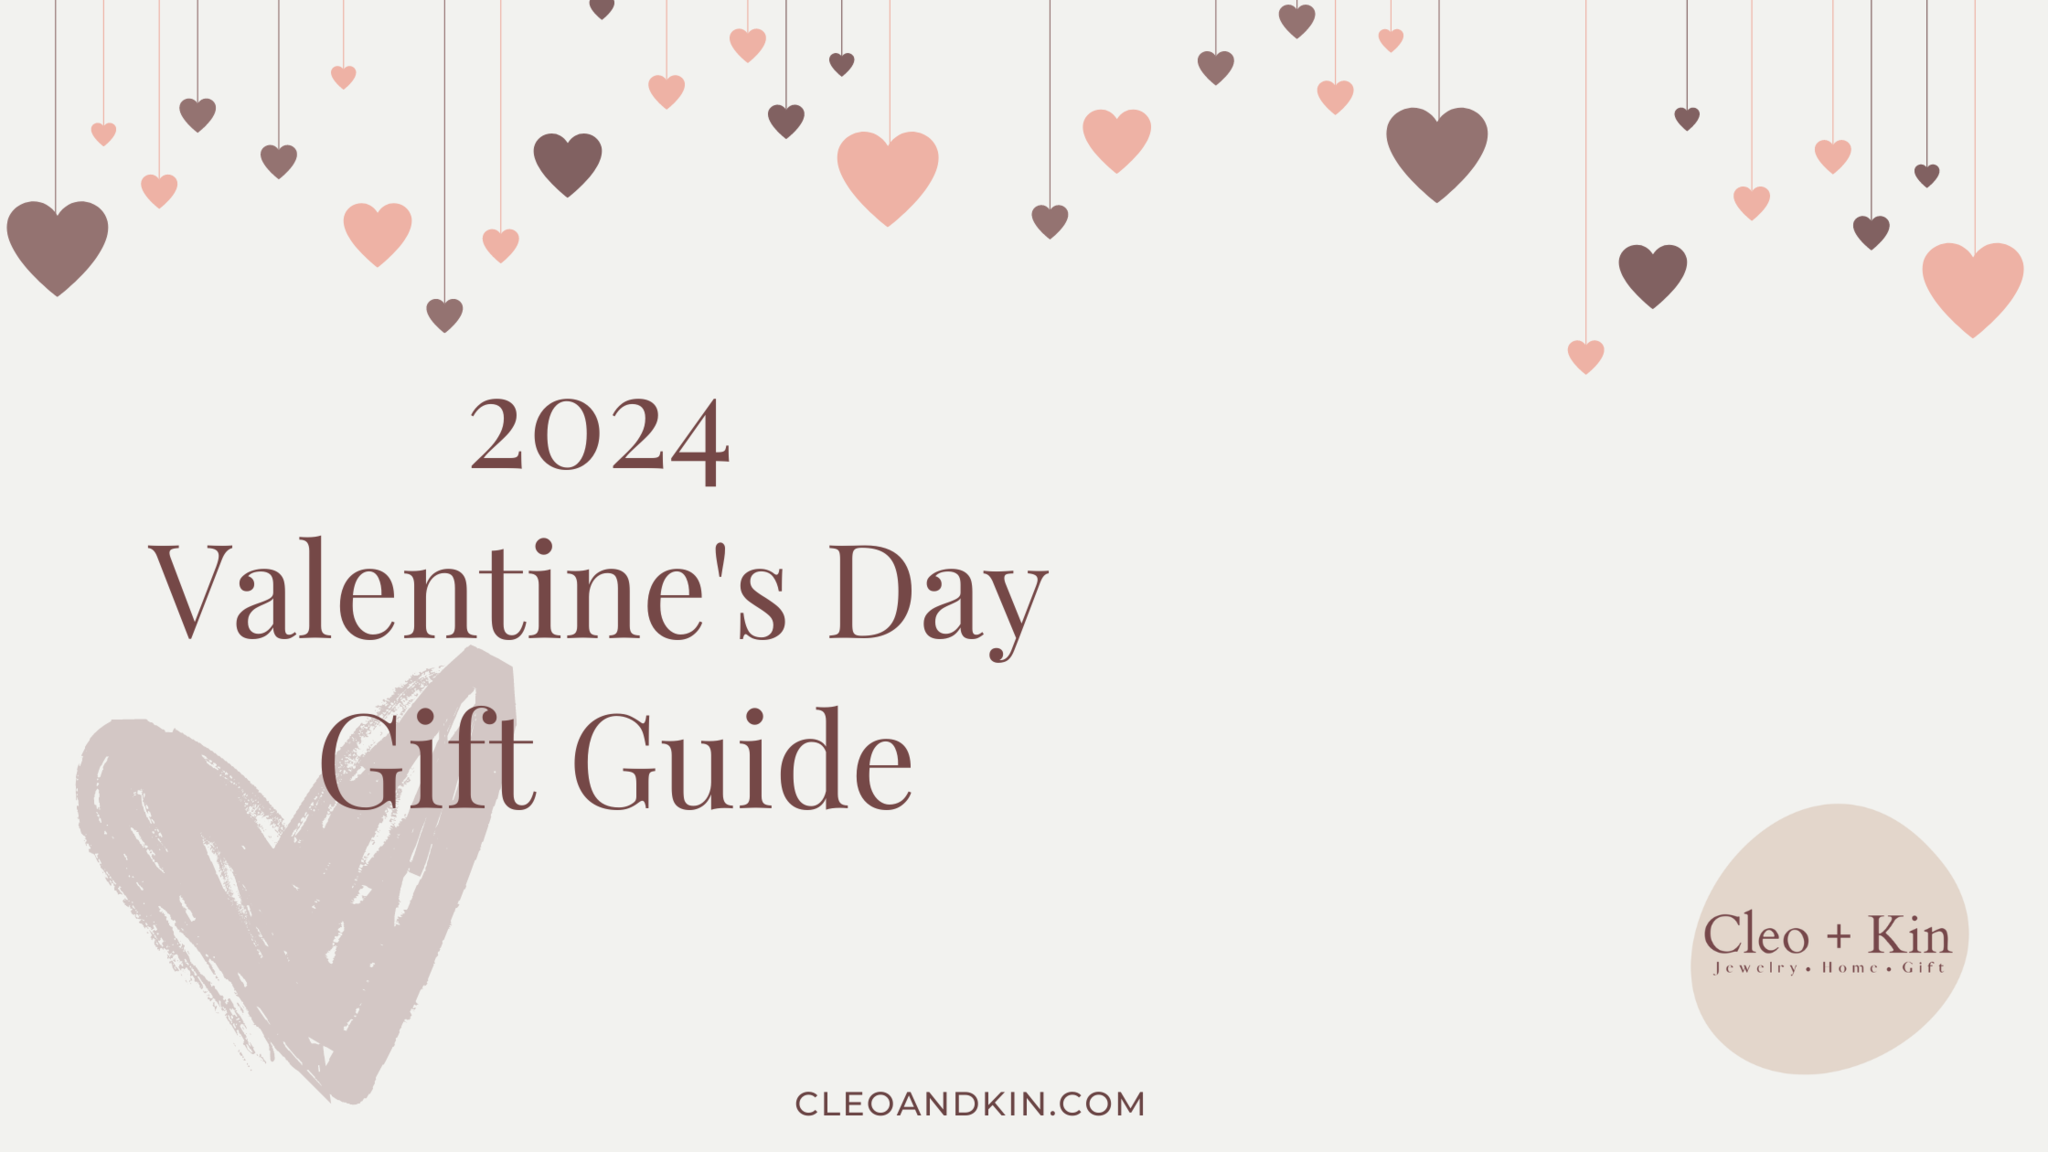 Celebrate Love in Every Hue: Your All-in-One Guide for Valentine's, Galentine's, and Self-Love Day from Cleo and Kin